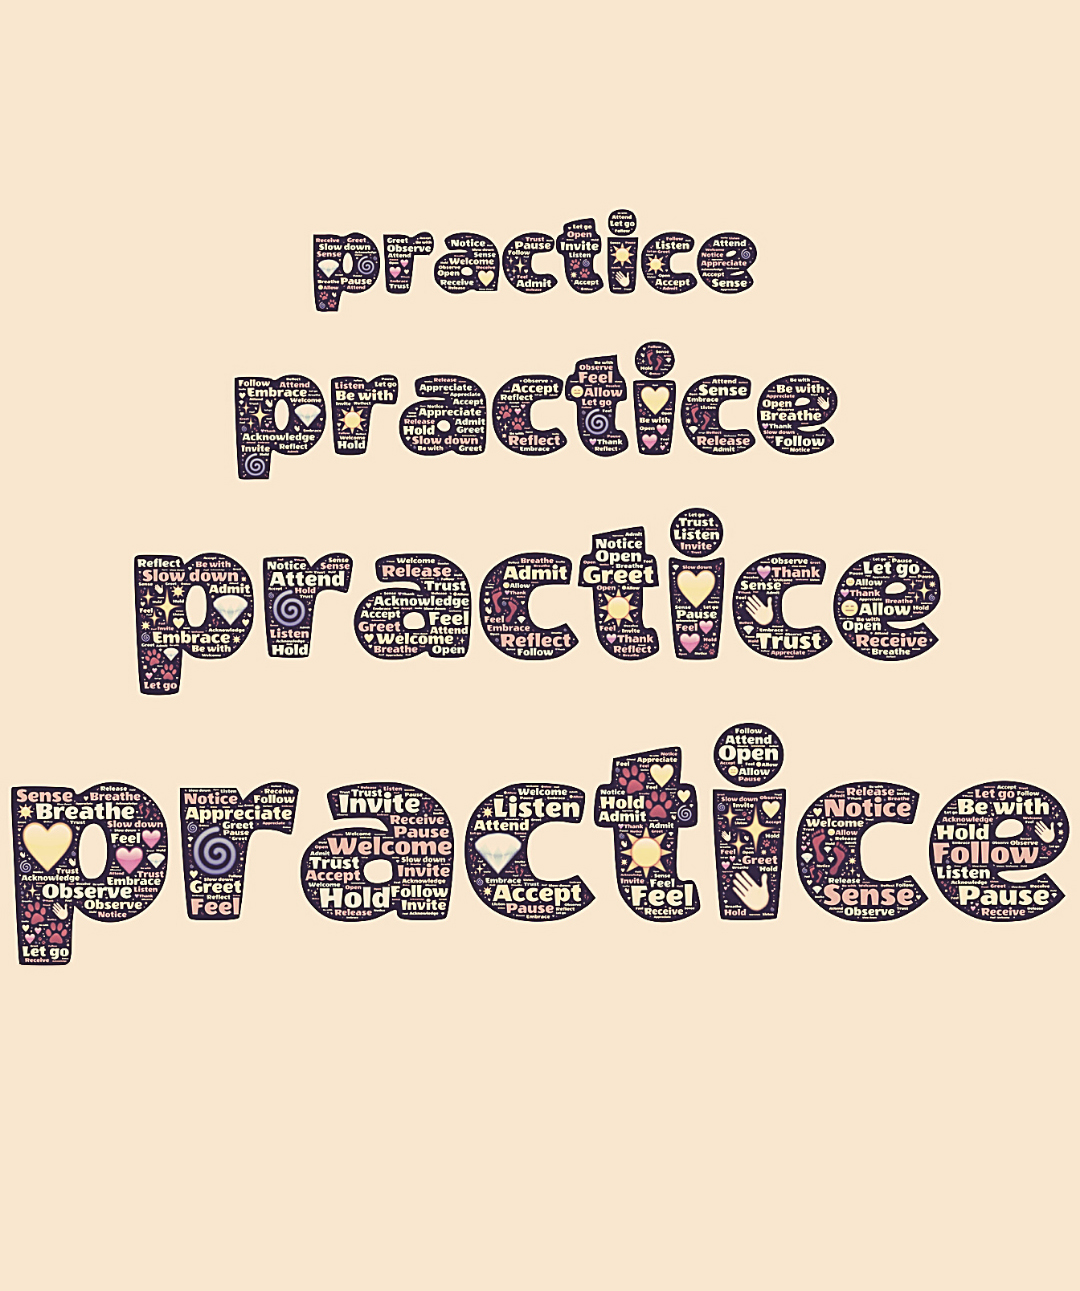 Art showing the word "Practice" written four times in a pyramid shape on a peach background